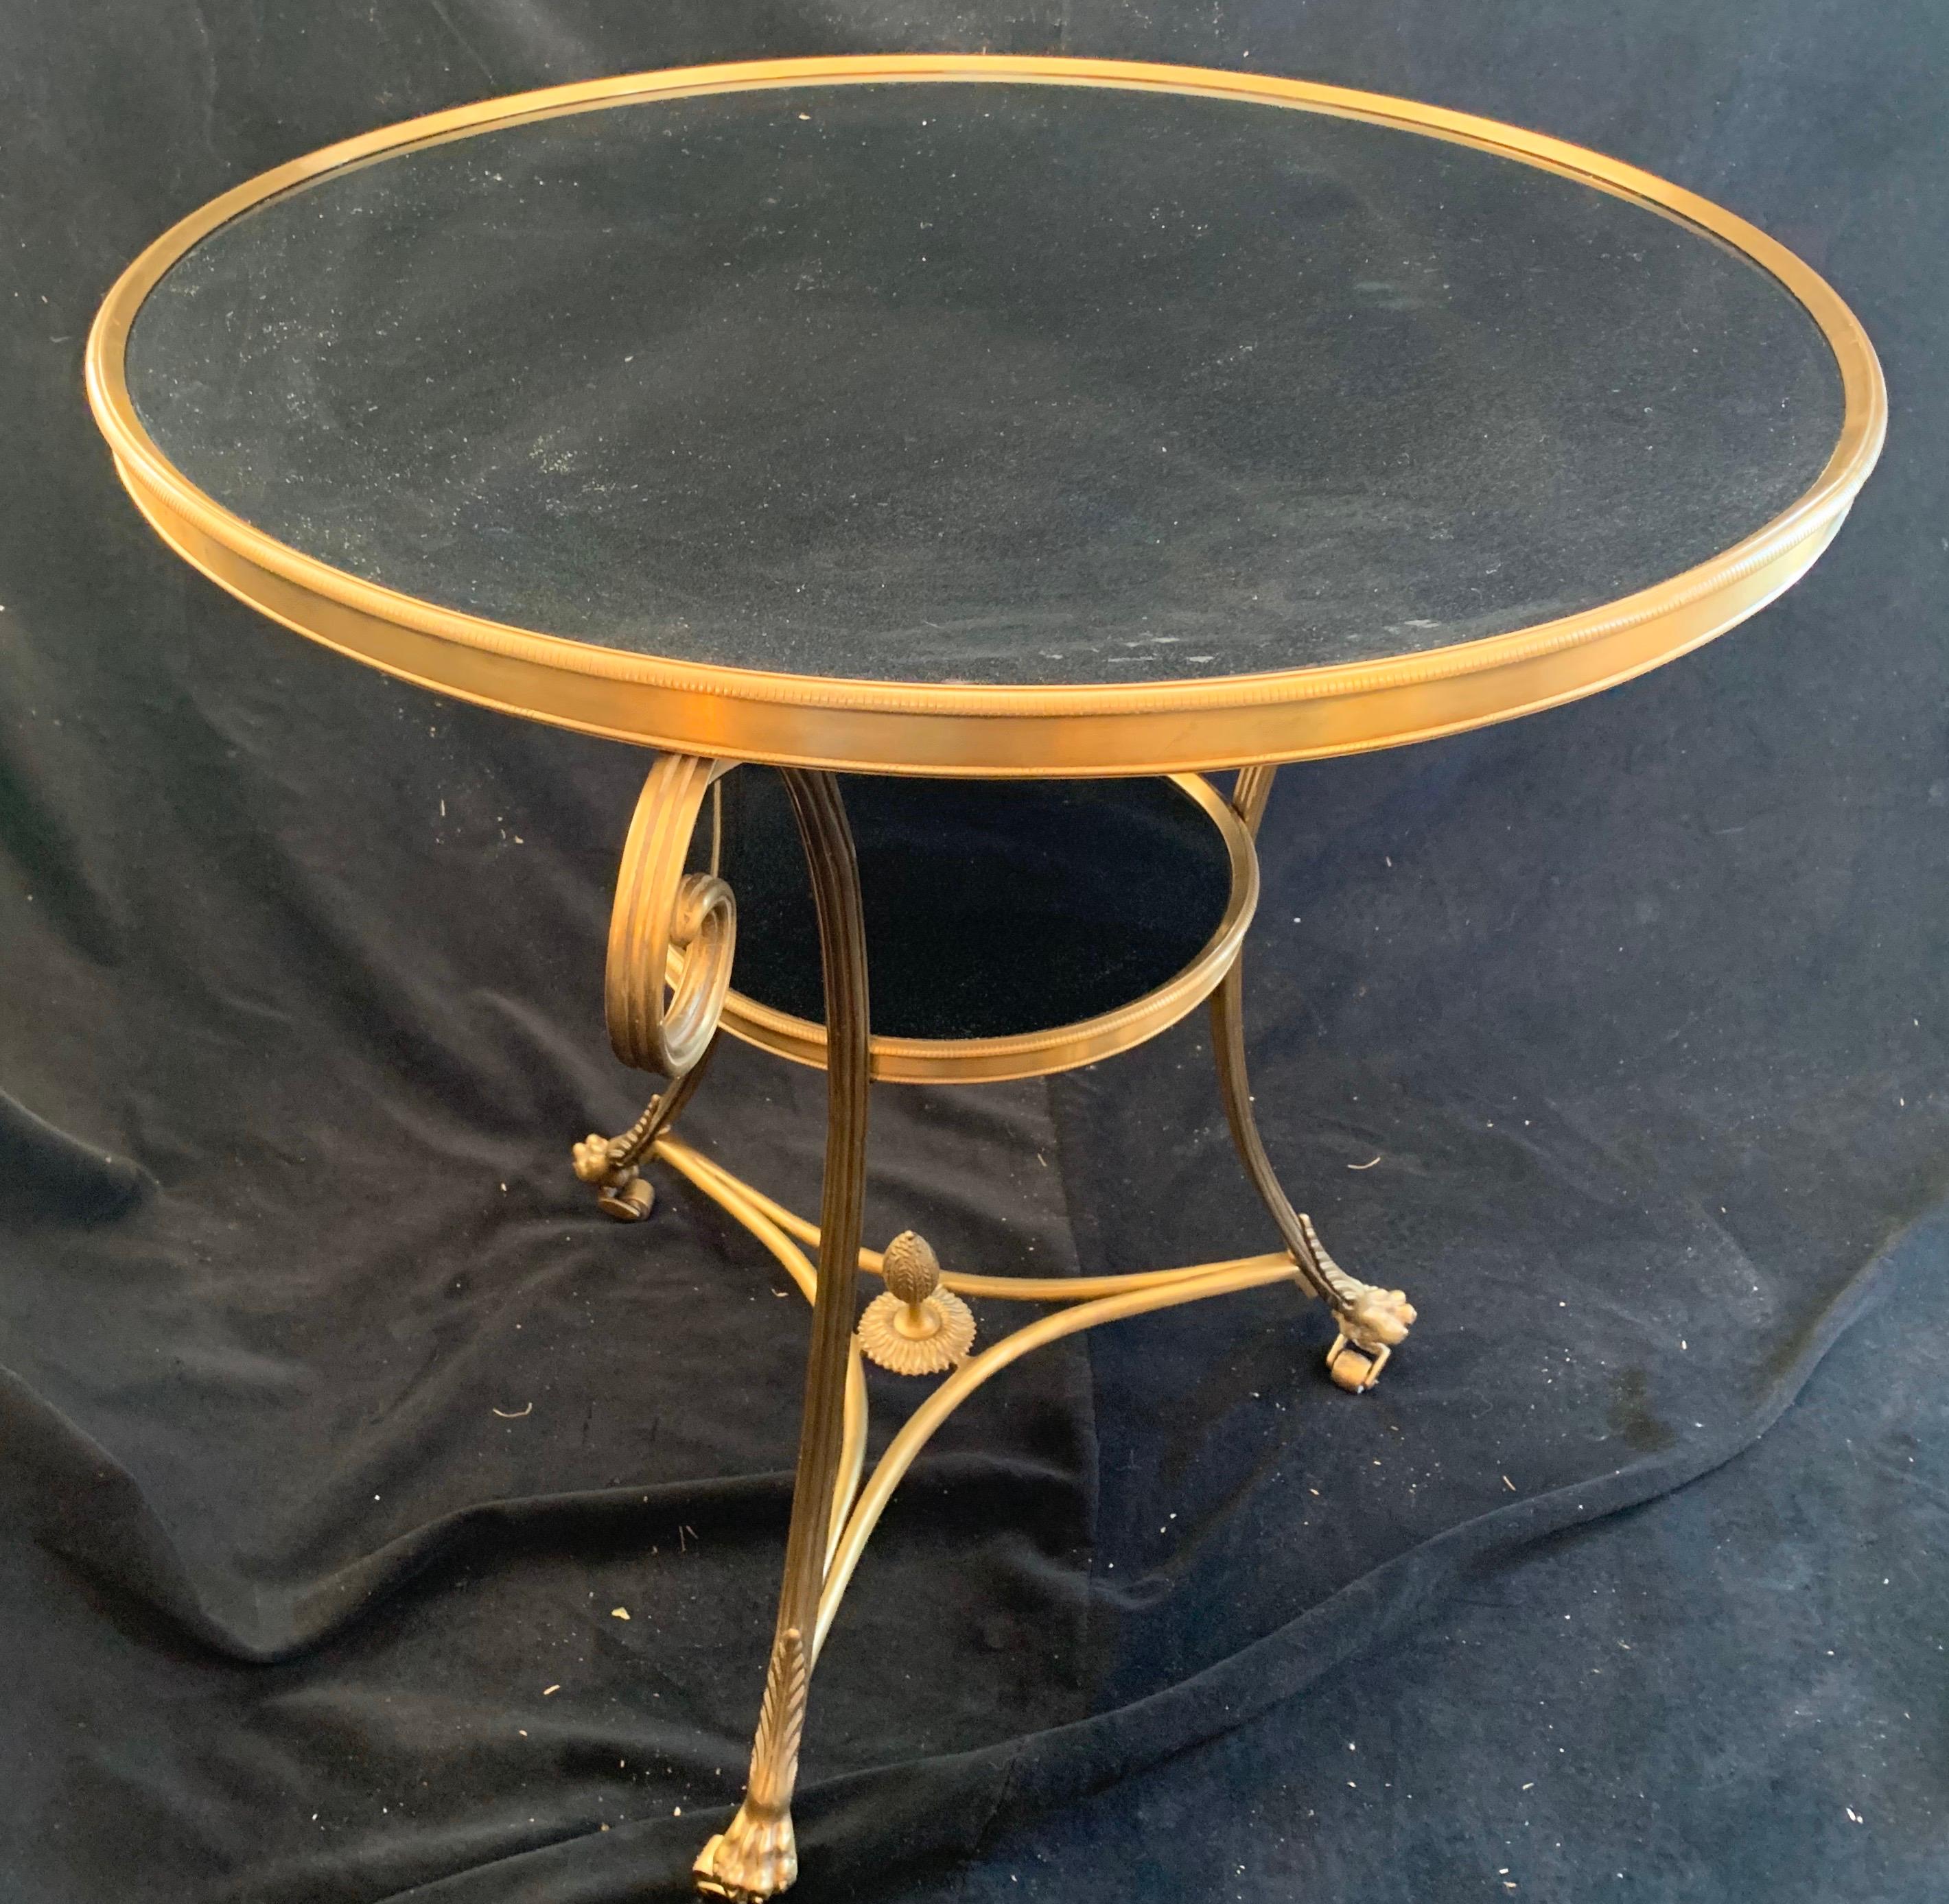 A wonderful pair of neoclassical gilt bronze ormolu and black marble top two-tier Louis XVI style gueridon tables on paw feet with casters.